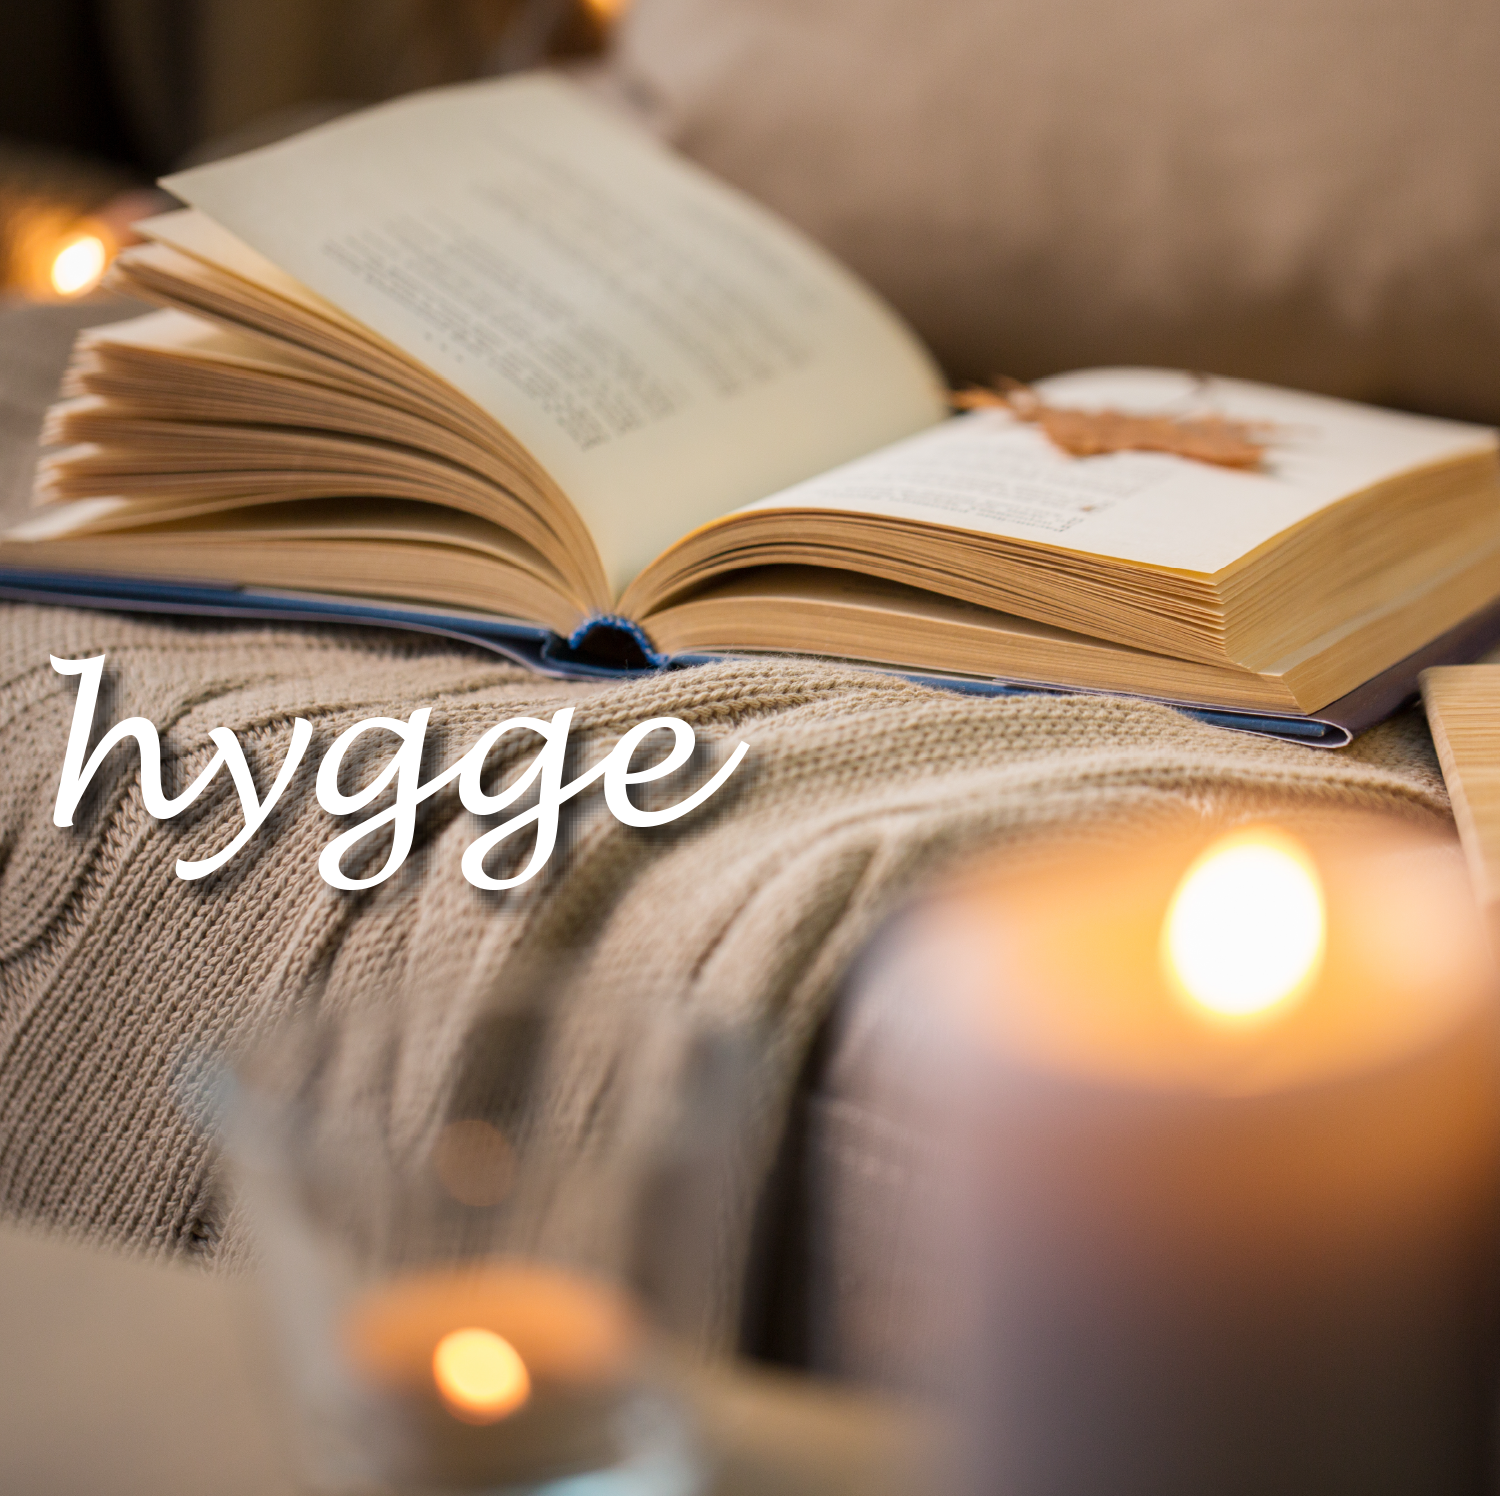 Hygge: Get consciously cozy